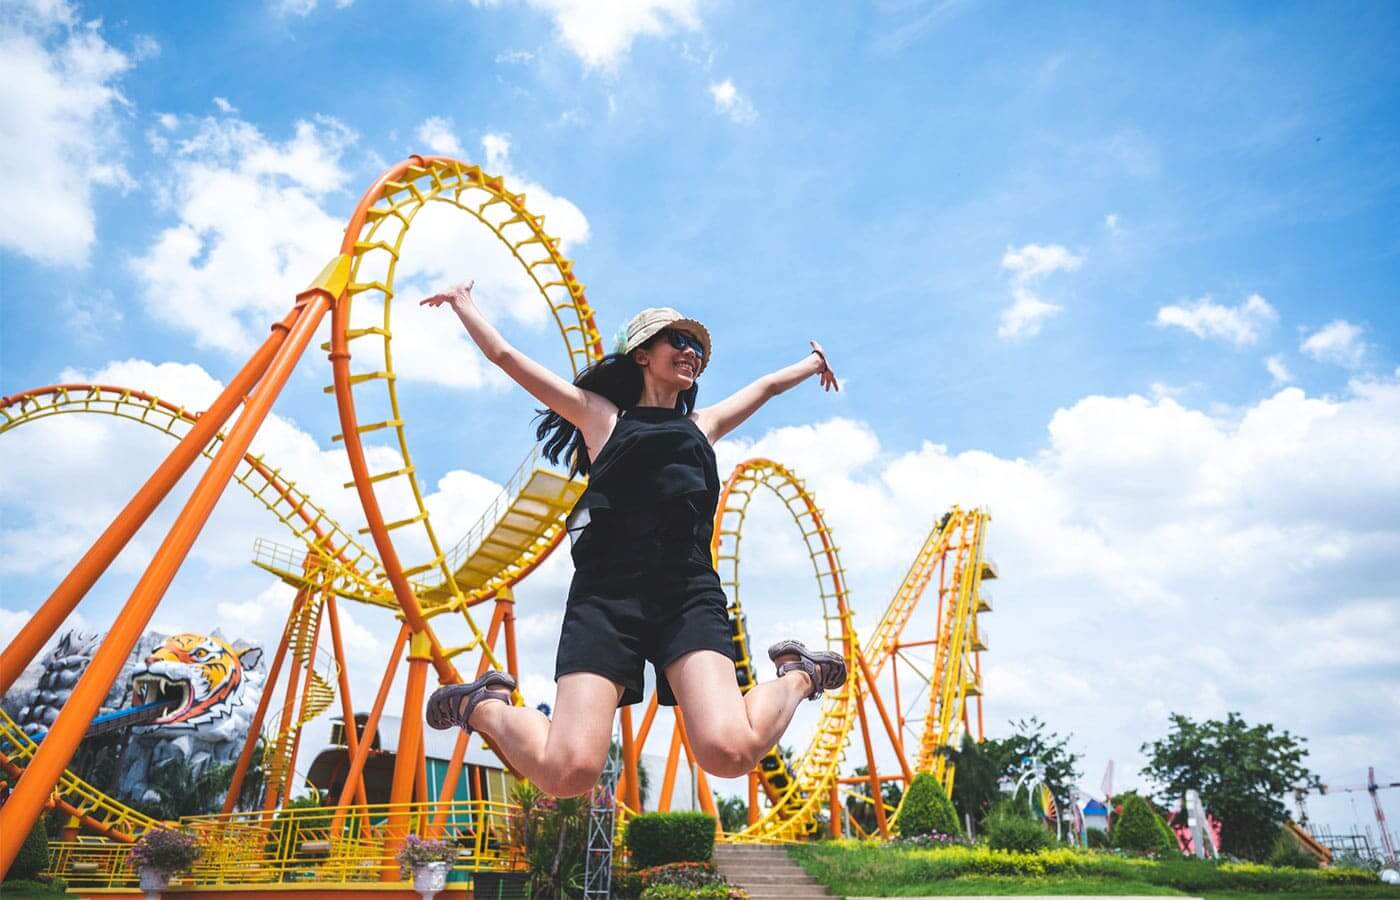 Young woman celebrating at a theme park